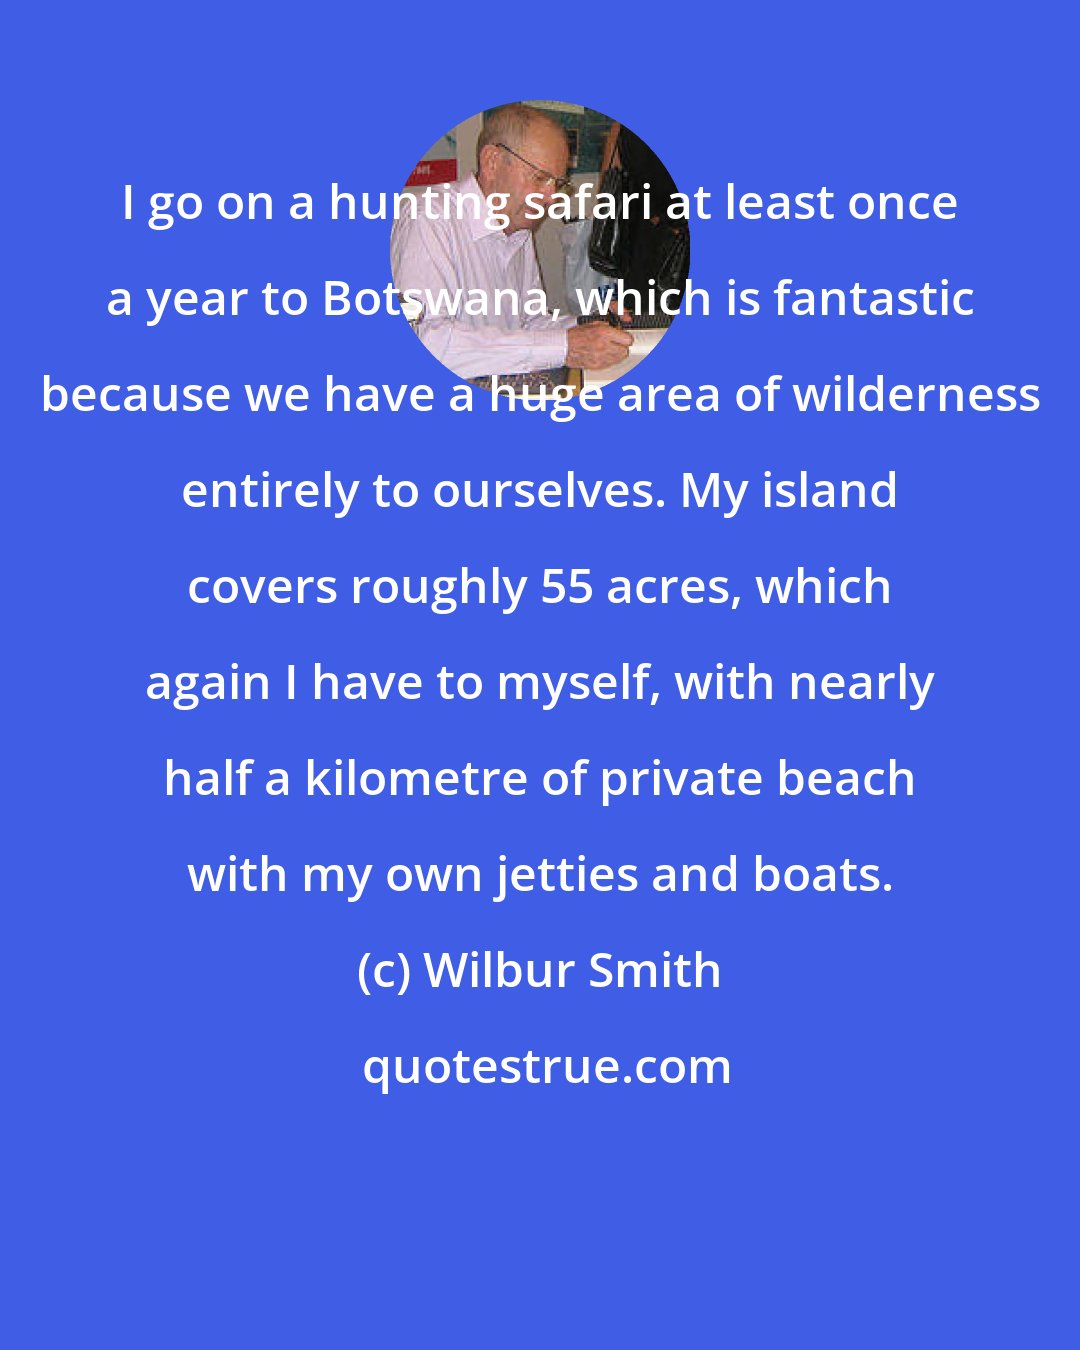 Wilbur Smith: I go on a hunting safari at least once a year to Botswana, which is fantastic because we have a huge area of wilderness entirely to ourselves. My island covers roughly 55 acres, which again I have to myself, with nearly half a kilometre of private beach with my own jetties and boats.